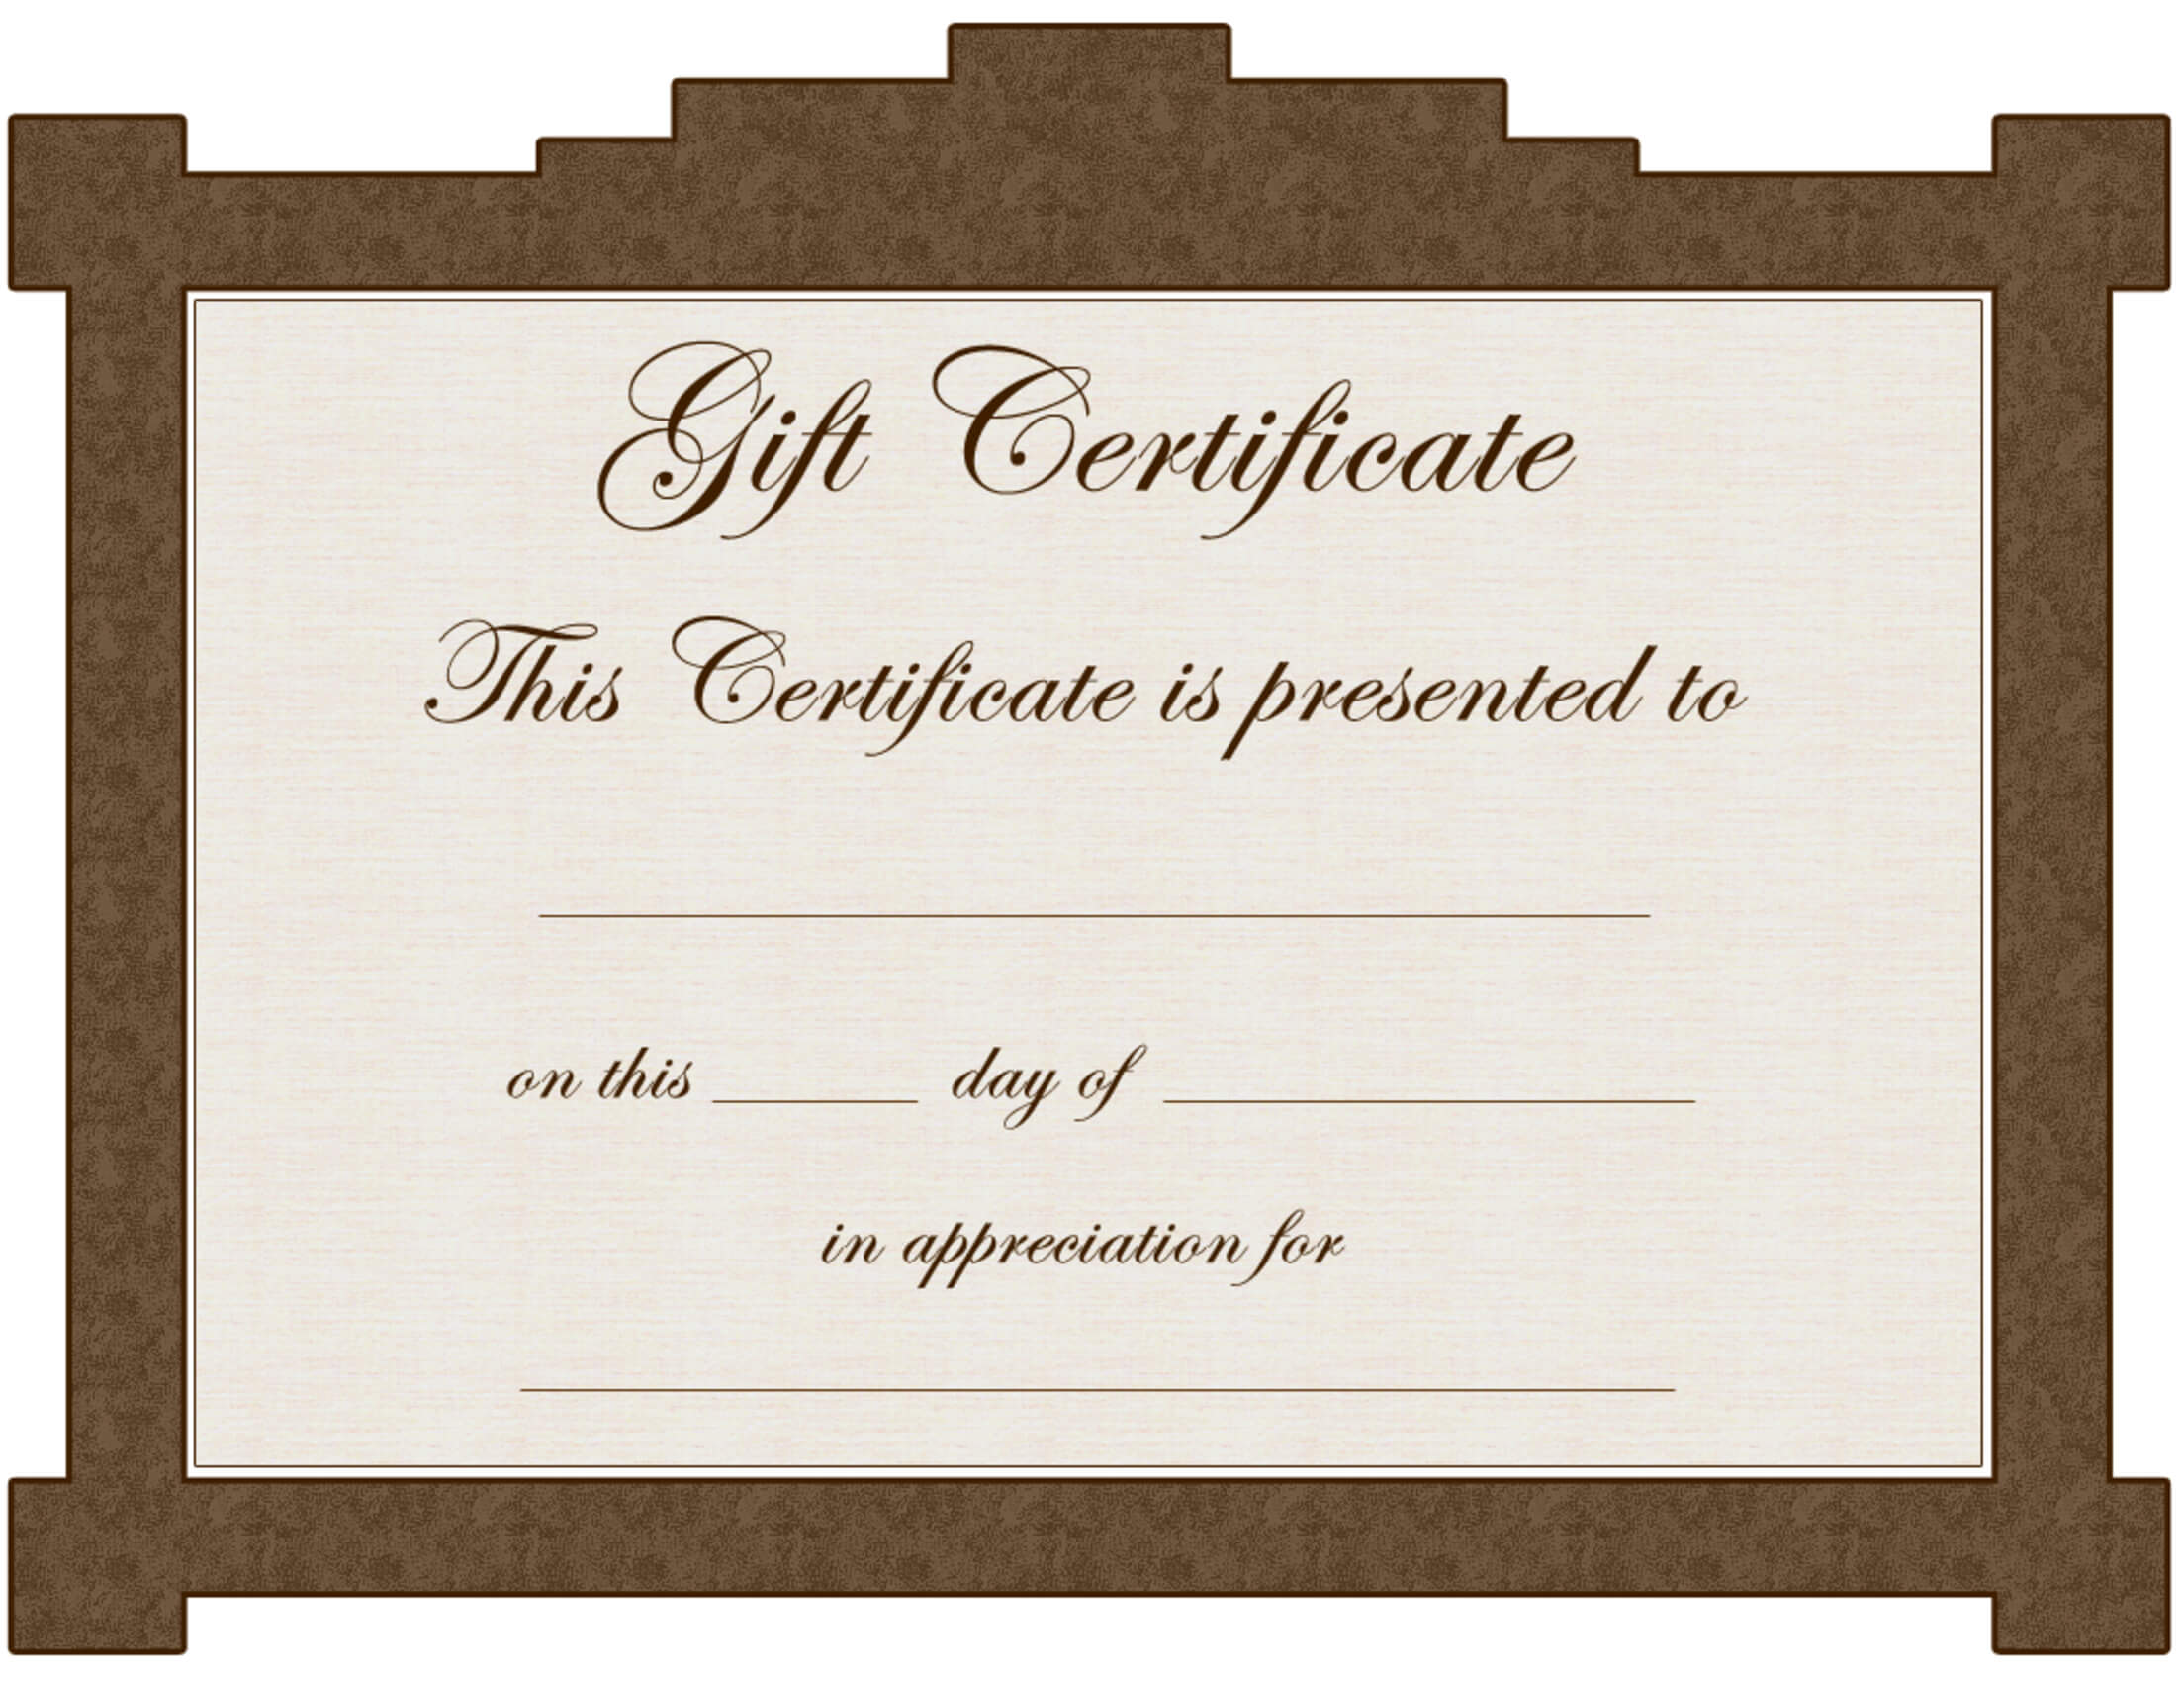 Clipart Gift Certificate Template Throughout Graduation Gift Certificate Template Free